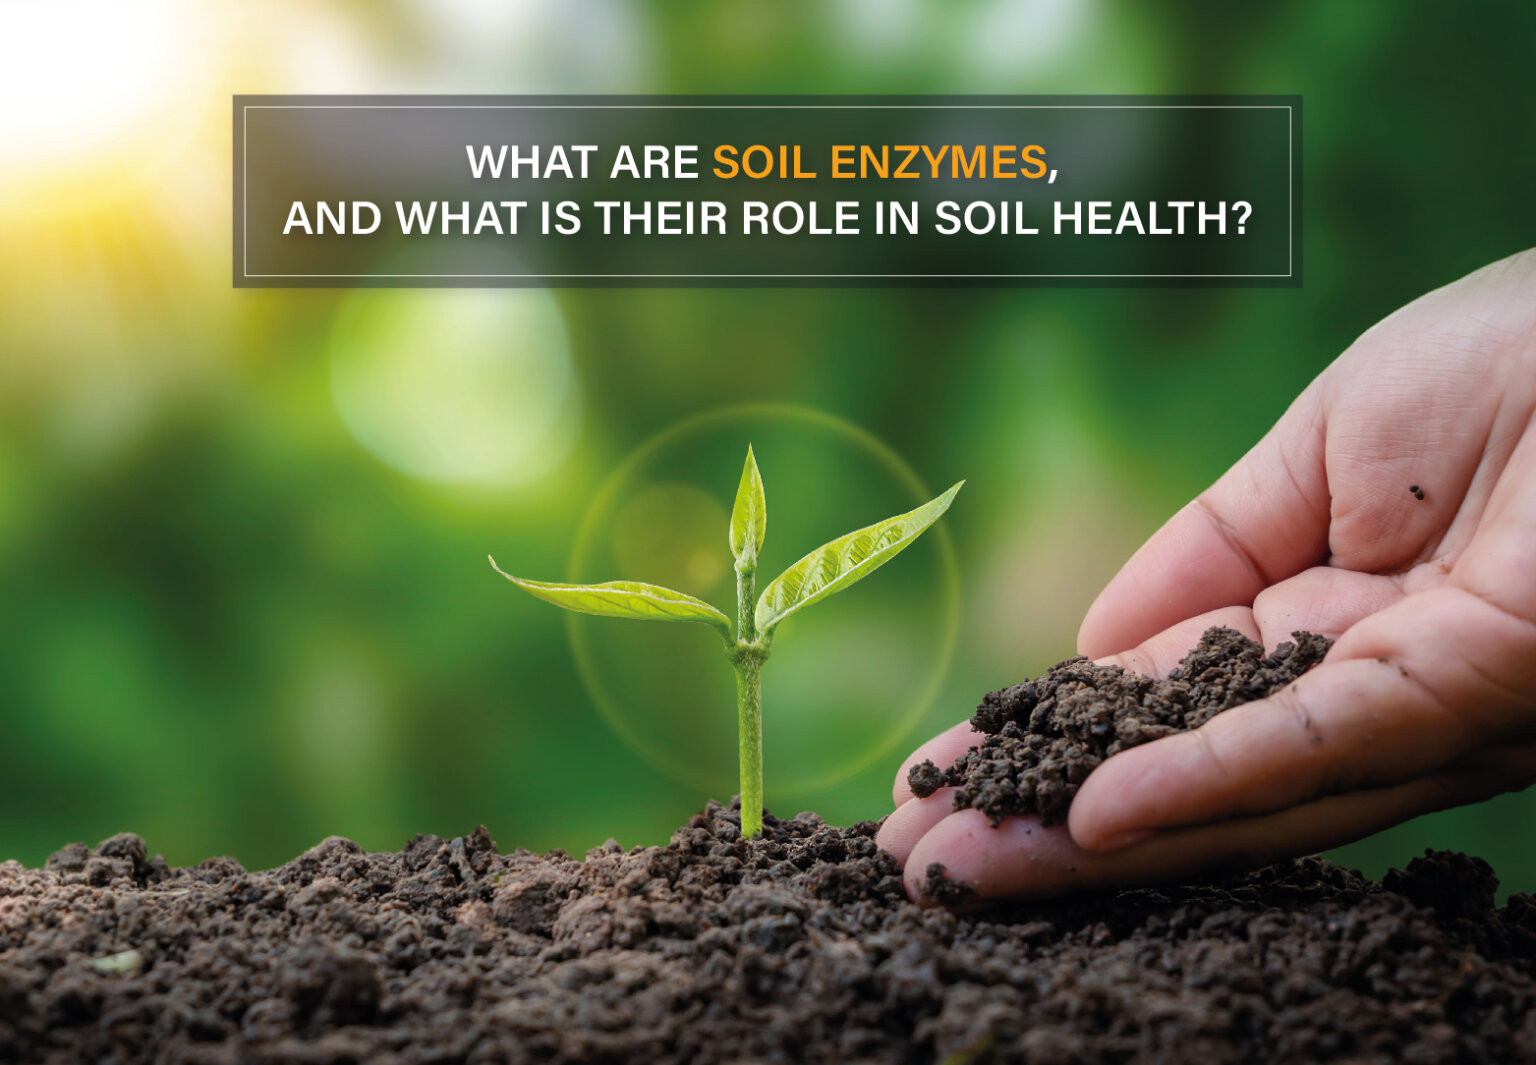 What Are Soil Enzymes, And What Is Their Role In Soil Health?